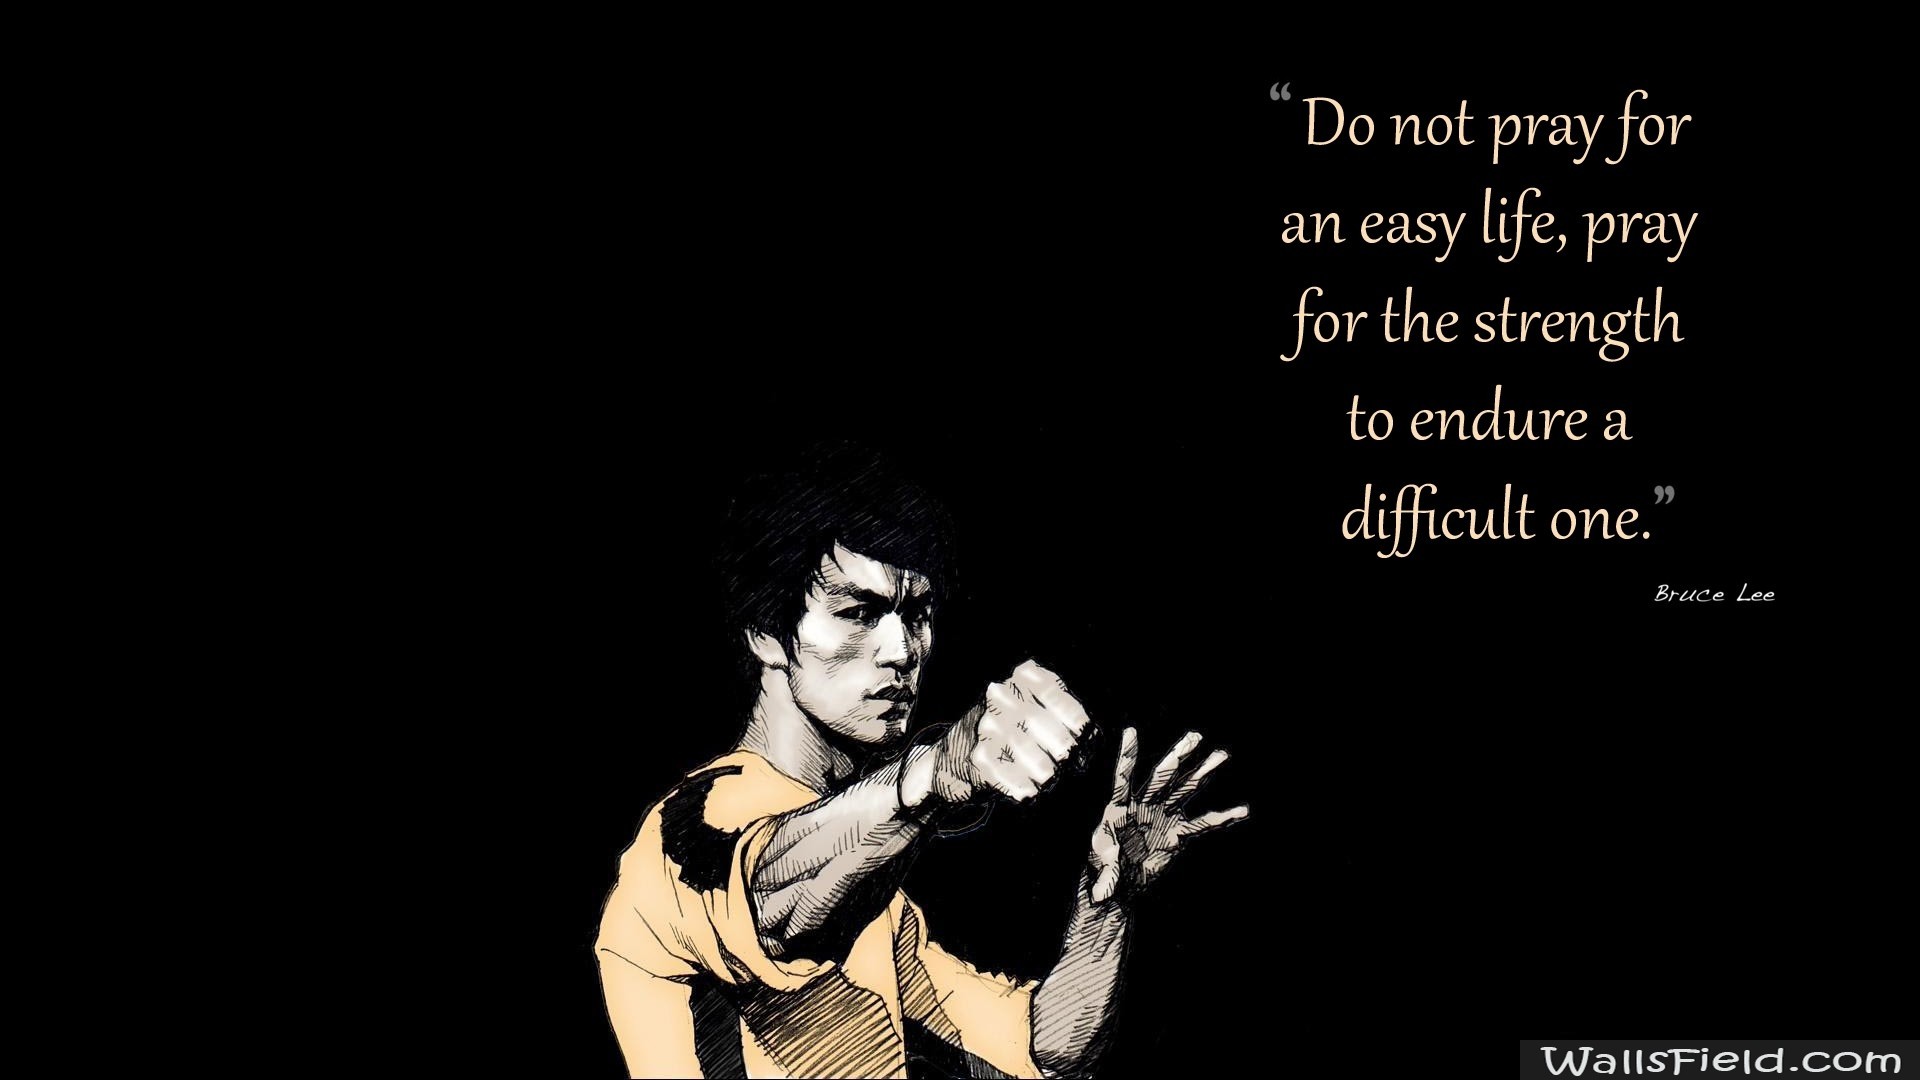 1920x1080 Bruce Lee inspirational quote Typography HD desktop wallpaper, Quote  wallpaper, Bruce Lee wallpaper, Inspiration wallpaper - Typography no.